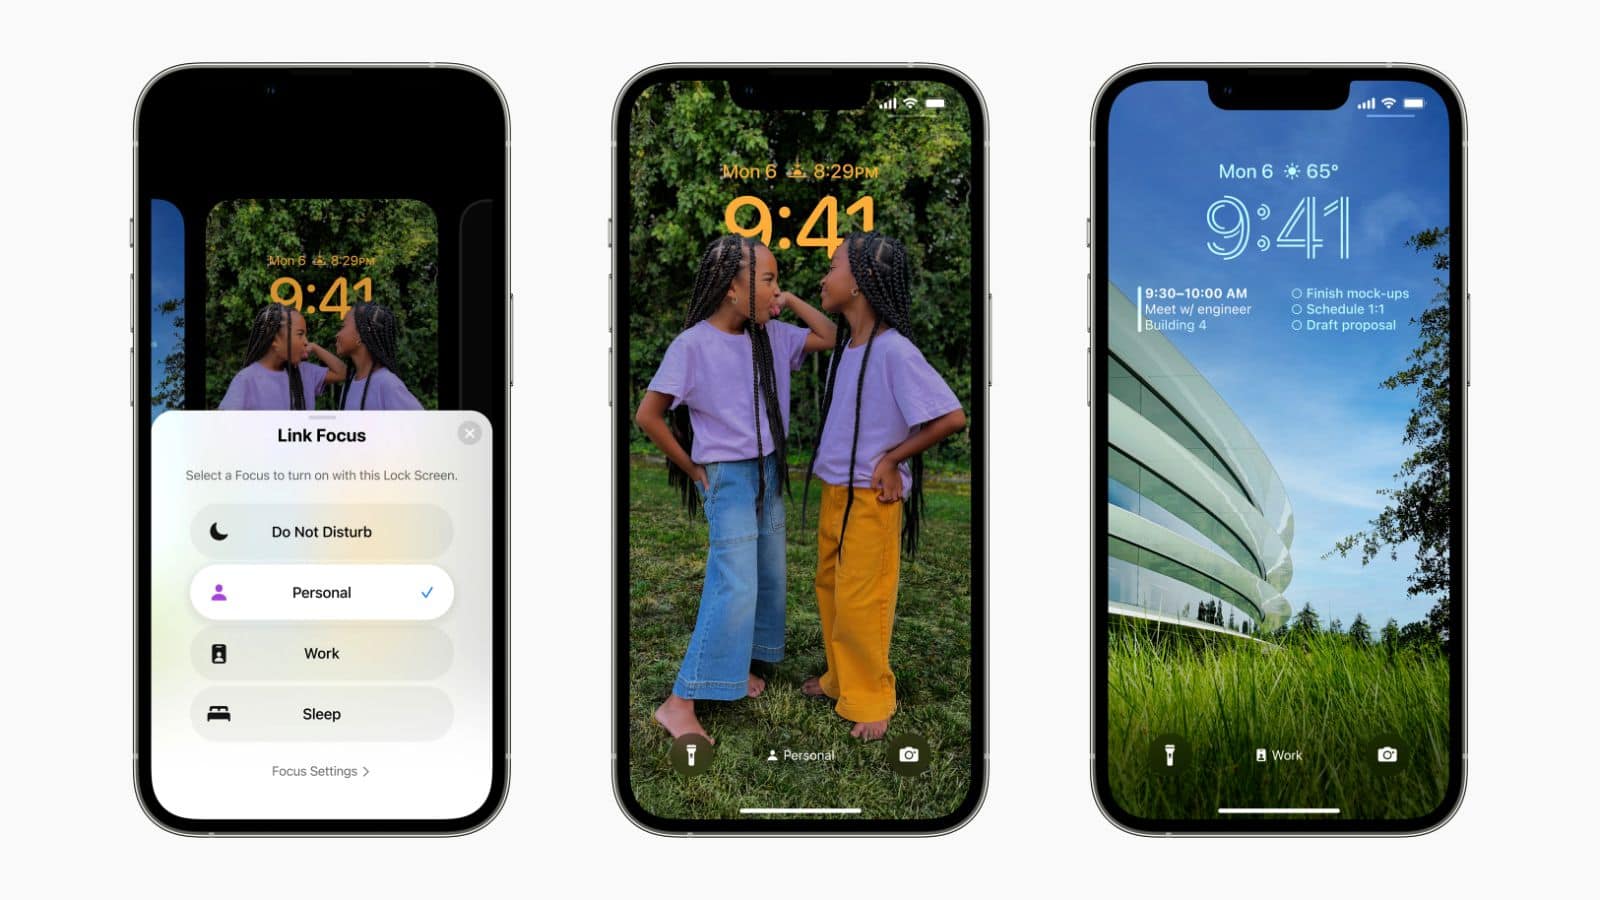 Focus modes are greatly expanded and refined for iOS 16 and across devices.